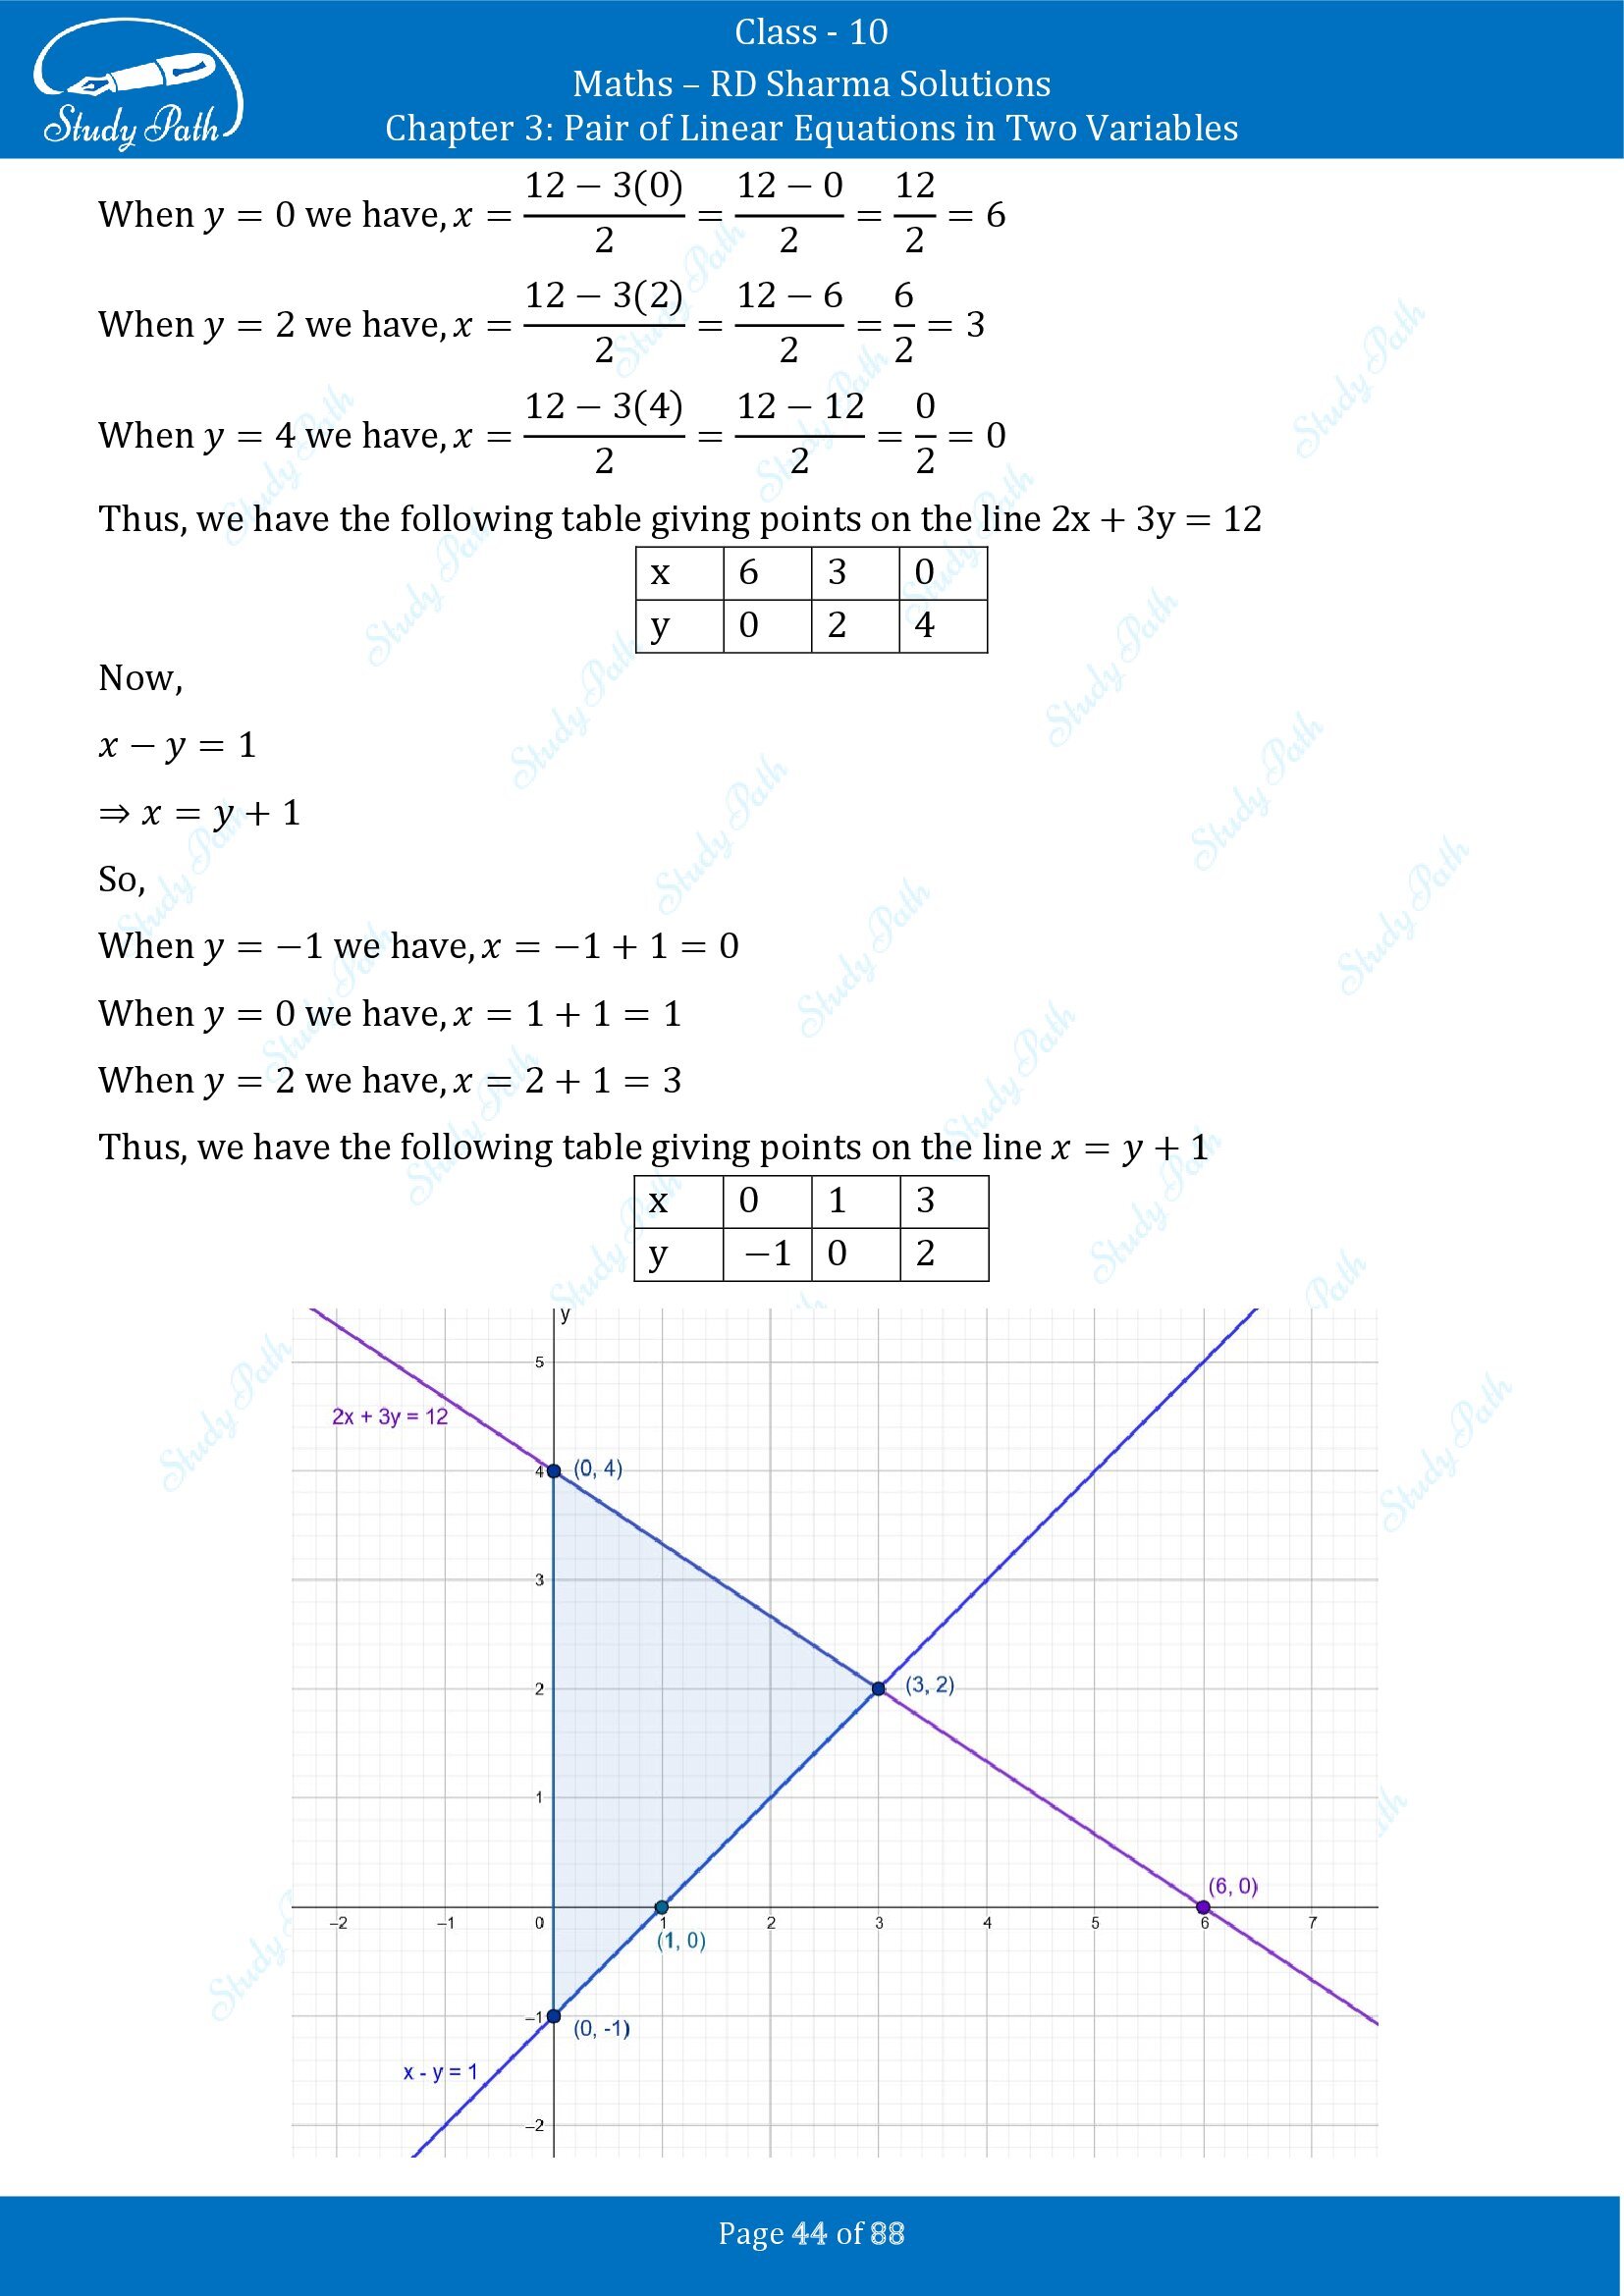 RD Sharma Solutions Class 10 Chapter 3 Pair of Linear Equations in Two Variables Exercise 3.2 00044